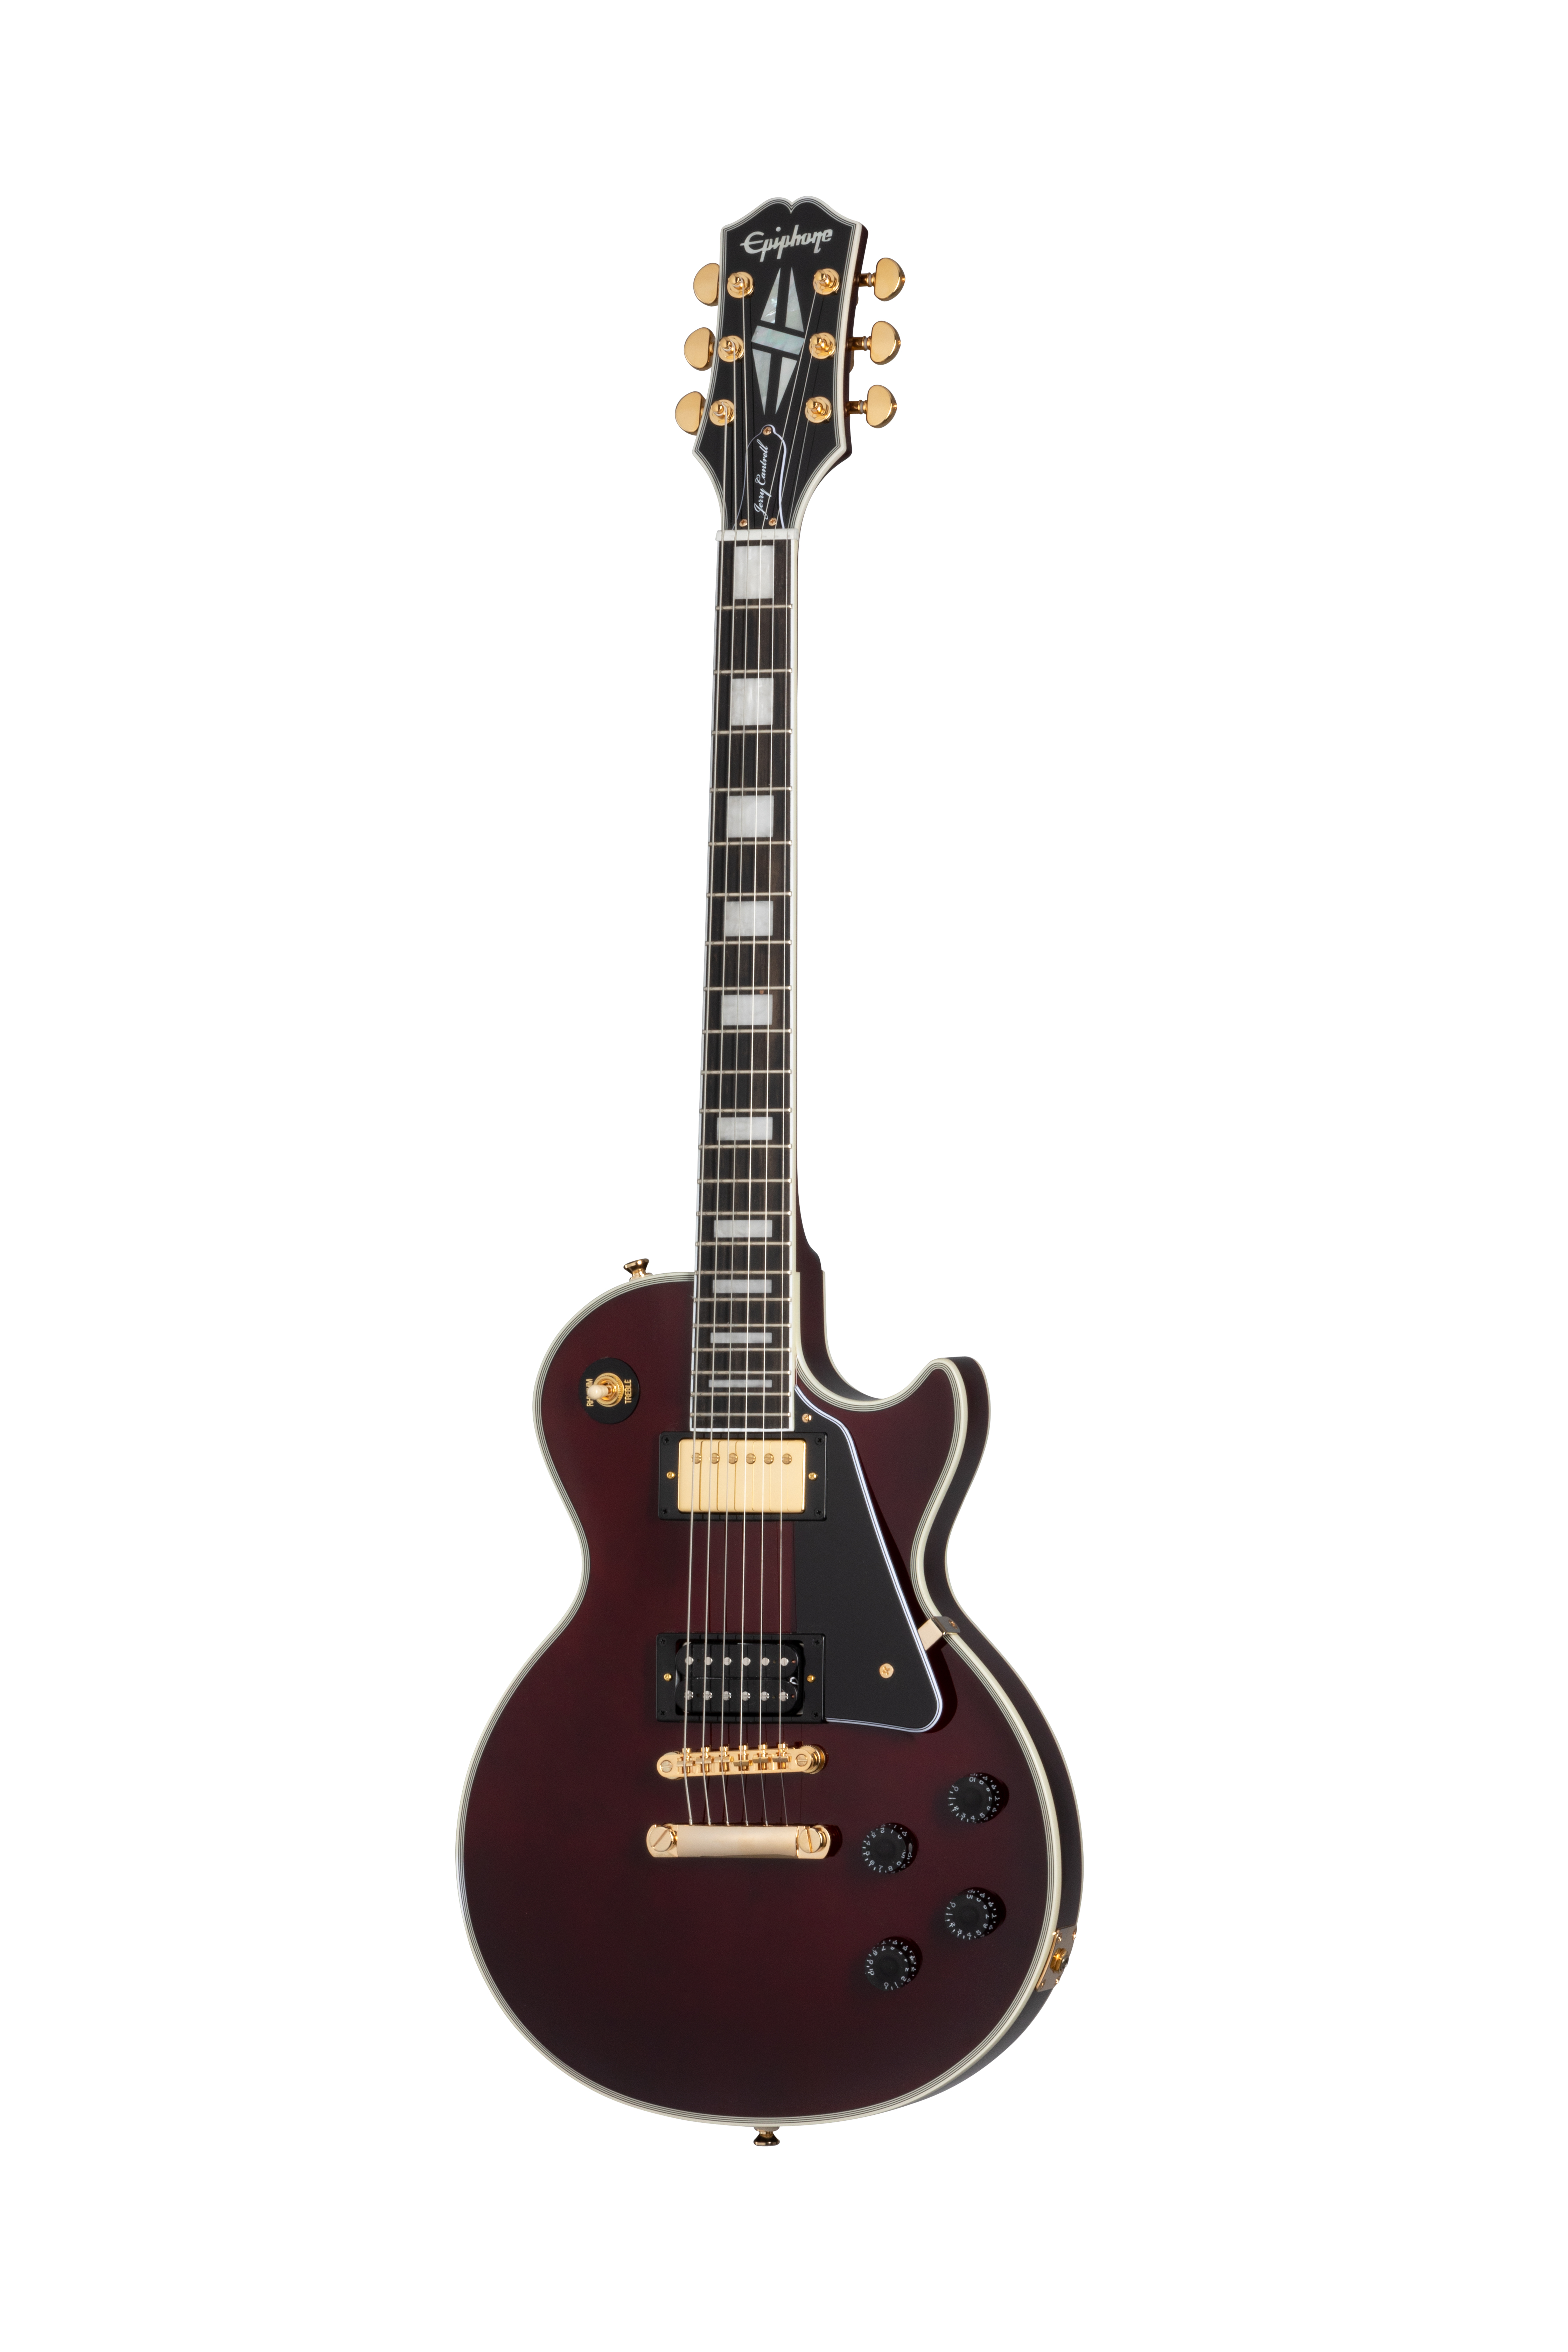 Jerry Cantrell Wino Les Paul Custom | Epiphone